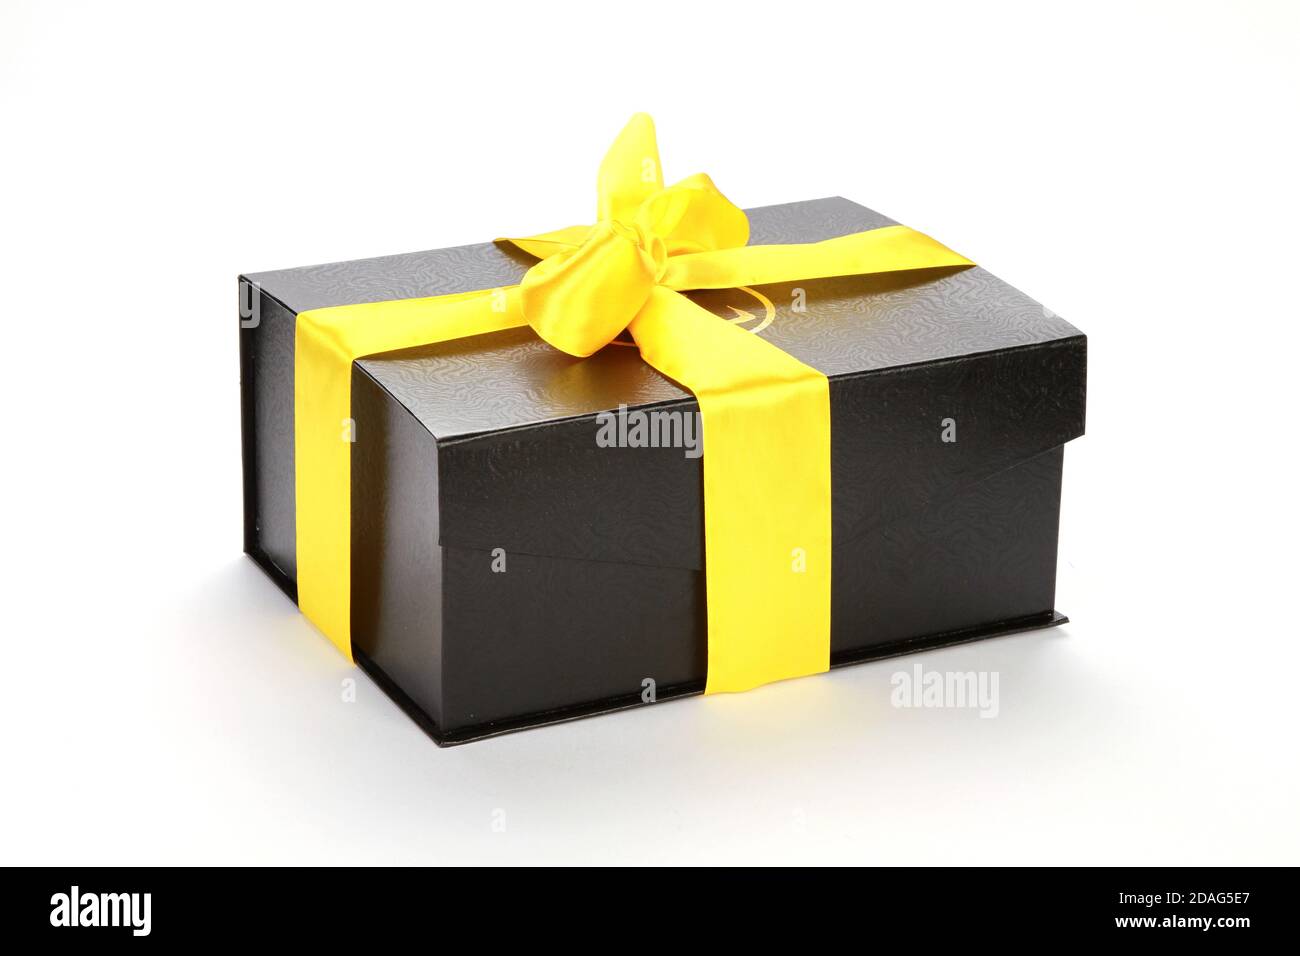 Premium Photo  Black gift with a beige ribbon on a yellow background. view  from above.